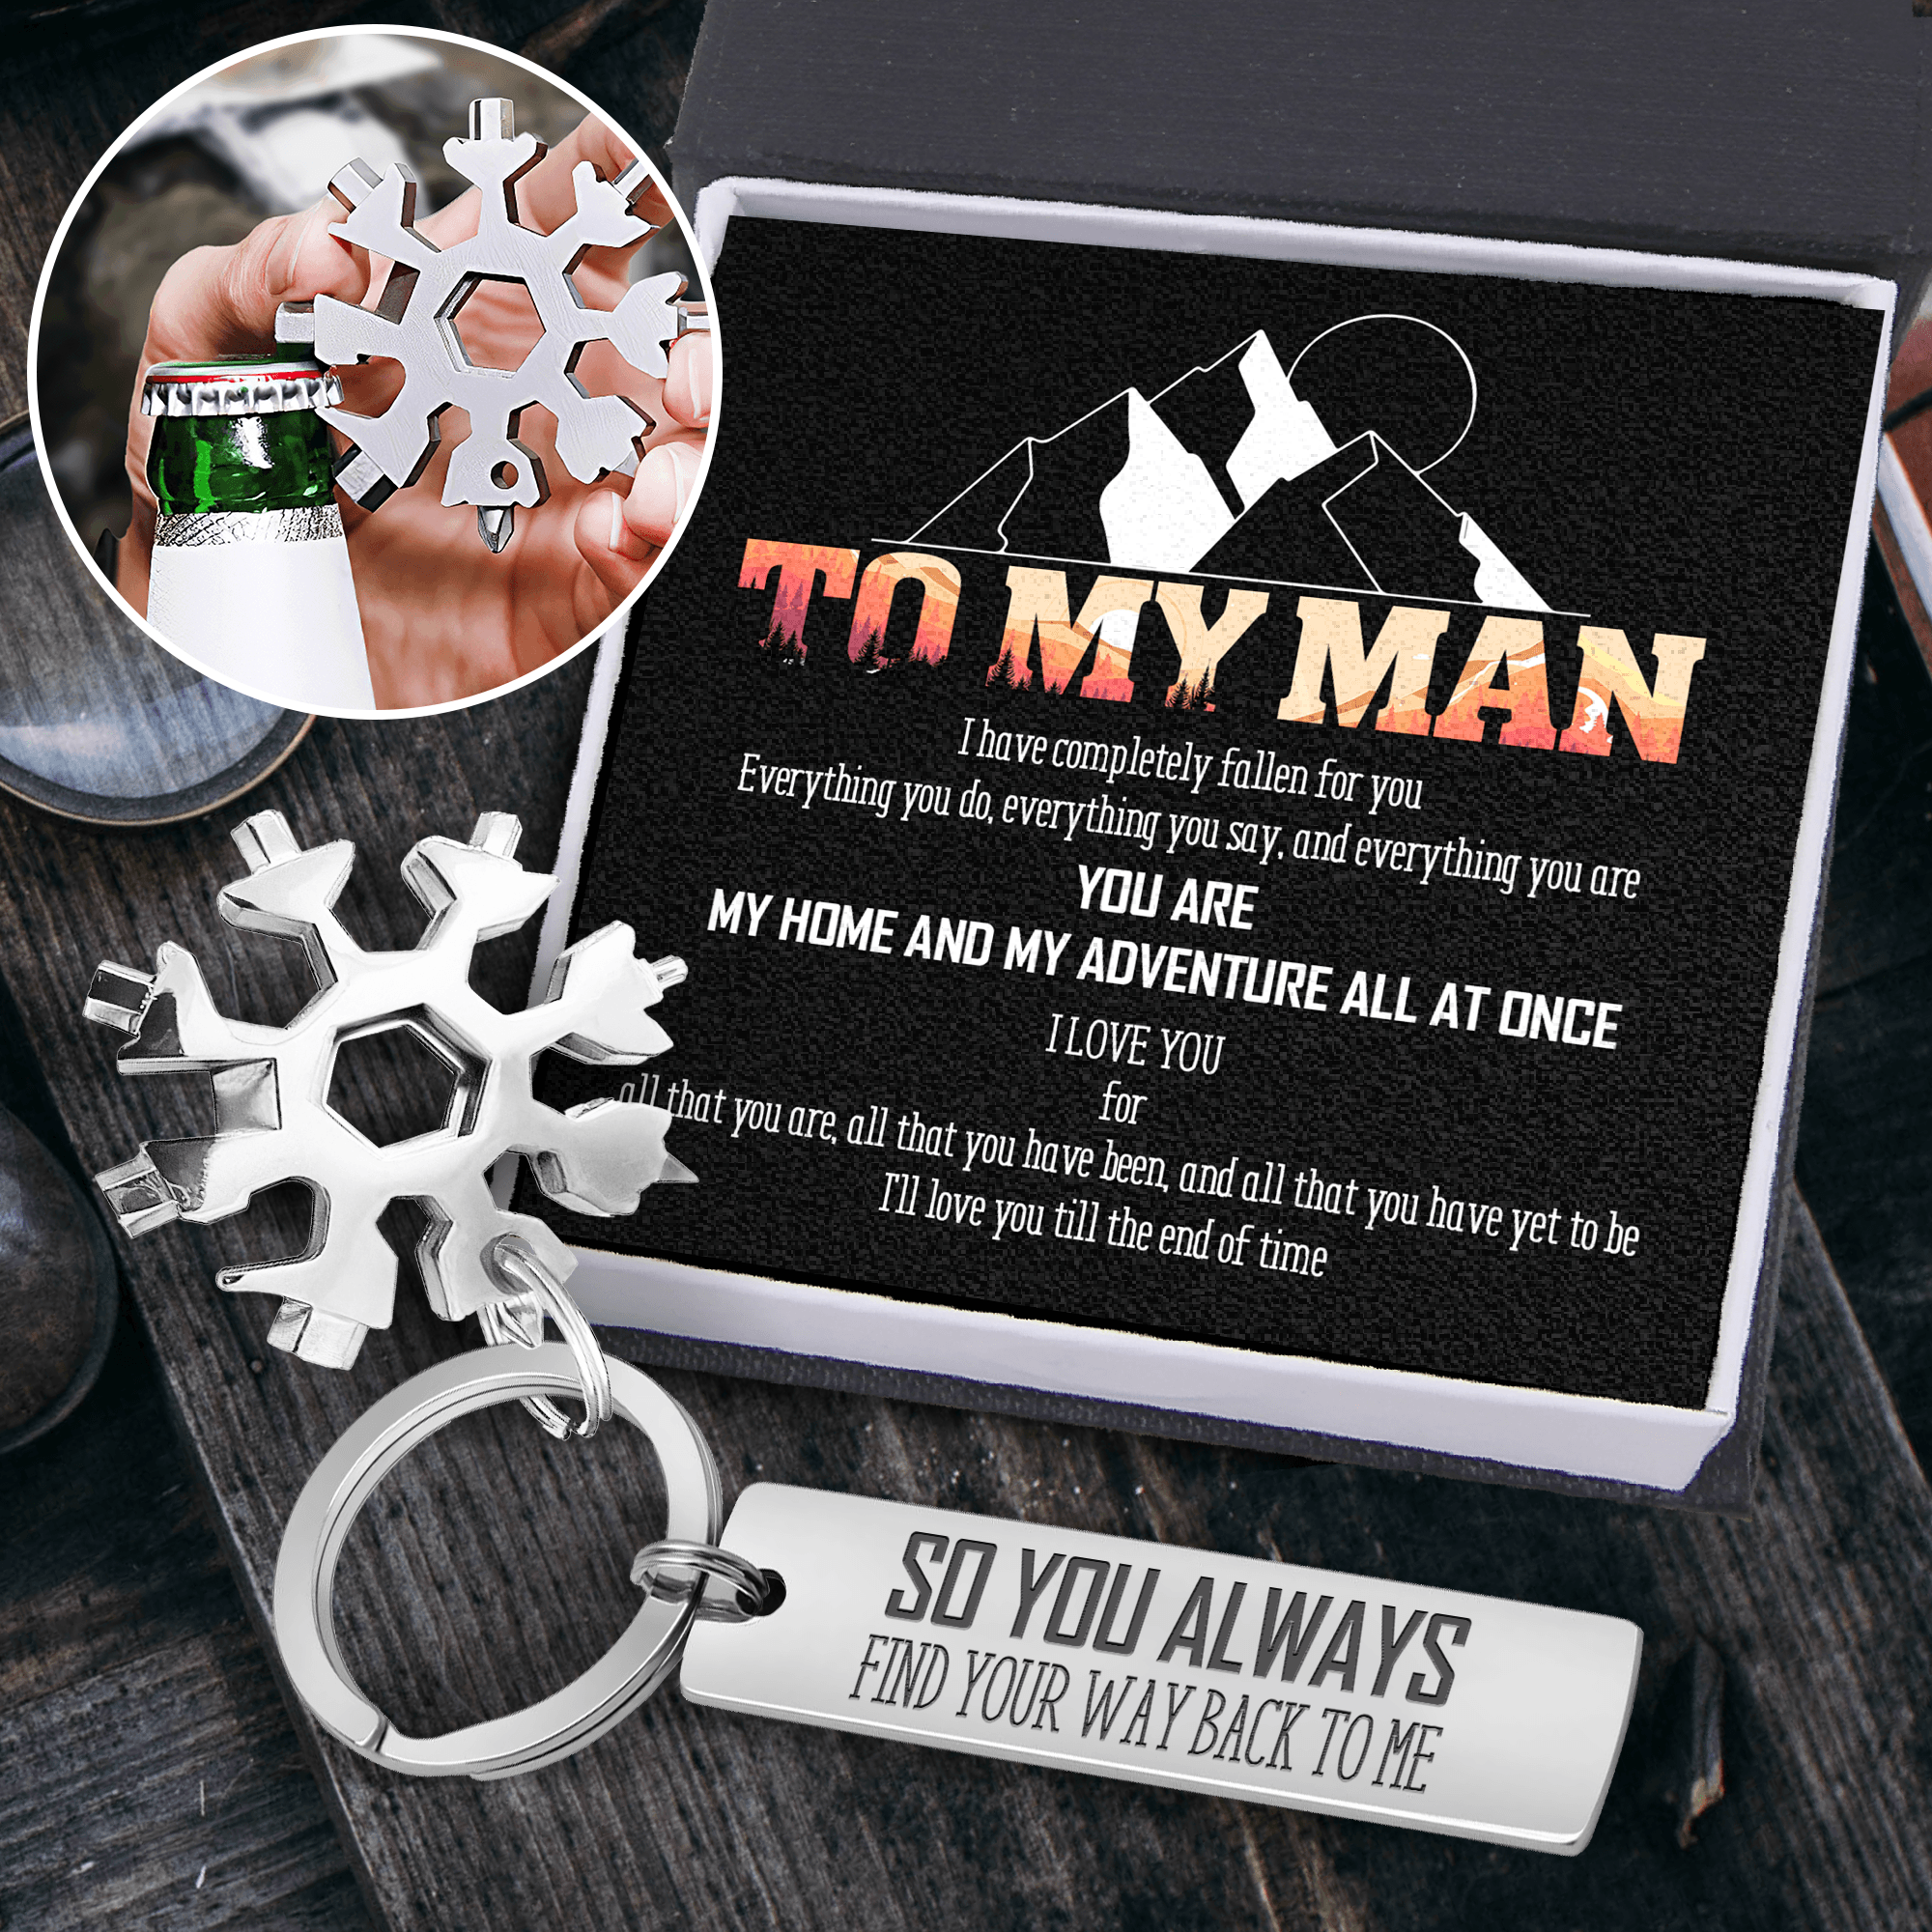 Multitool Keychain - Hiking - To My Man - So You Always Find Your Way Back To Me - Augktb26001 - Gifts Holder